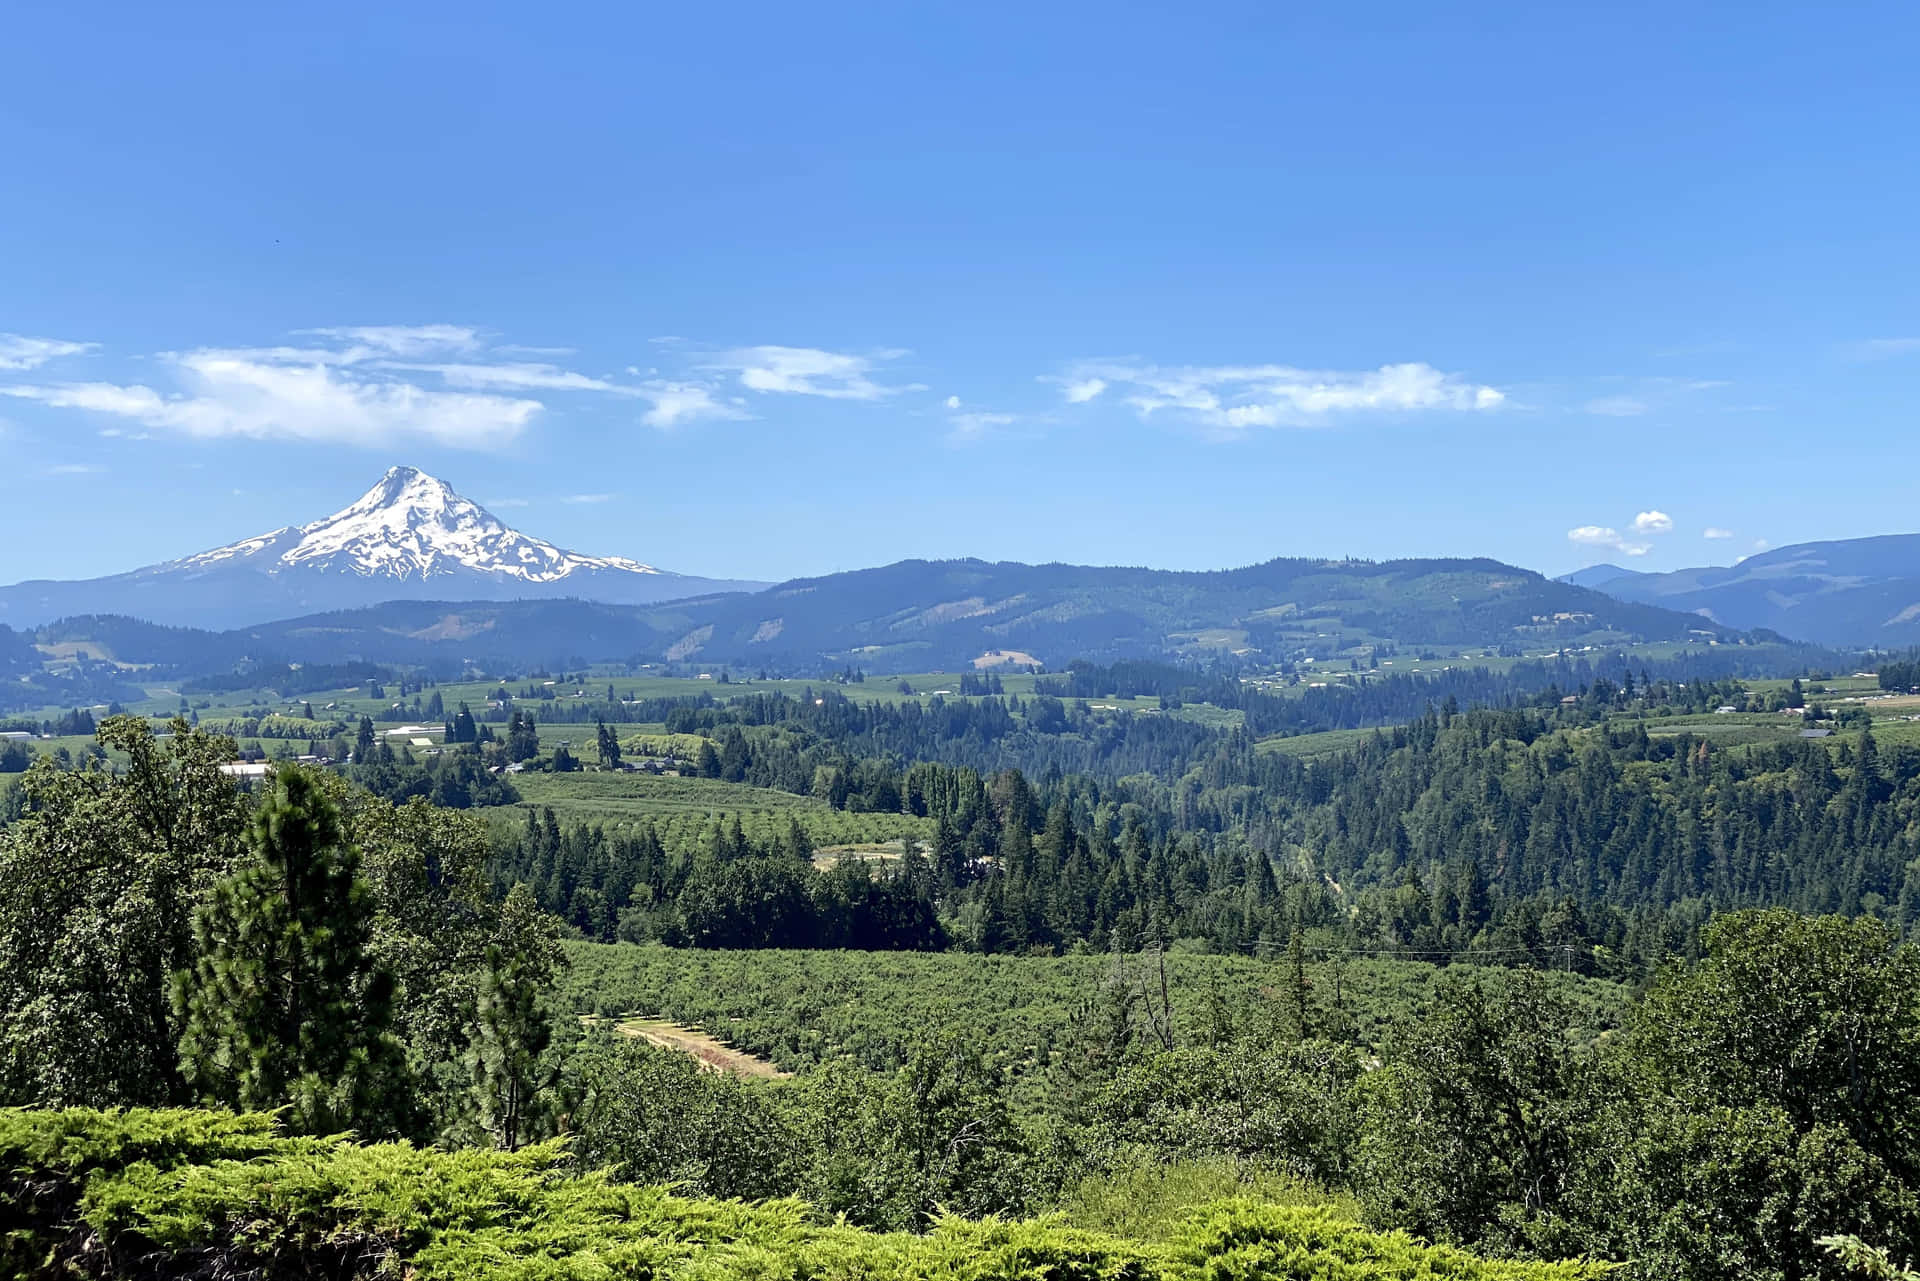 Mount Hood, Oregon - The Bliss of Nature